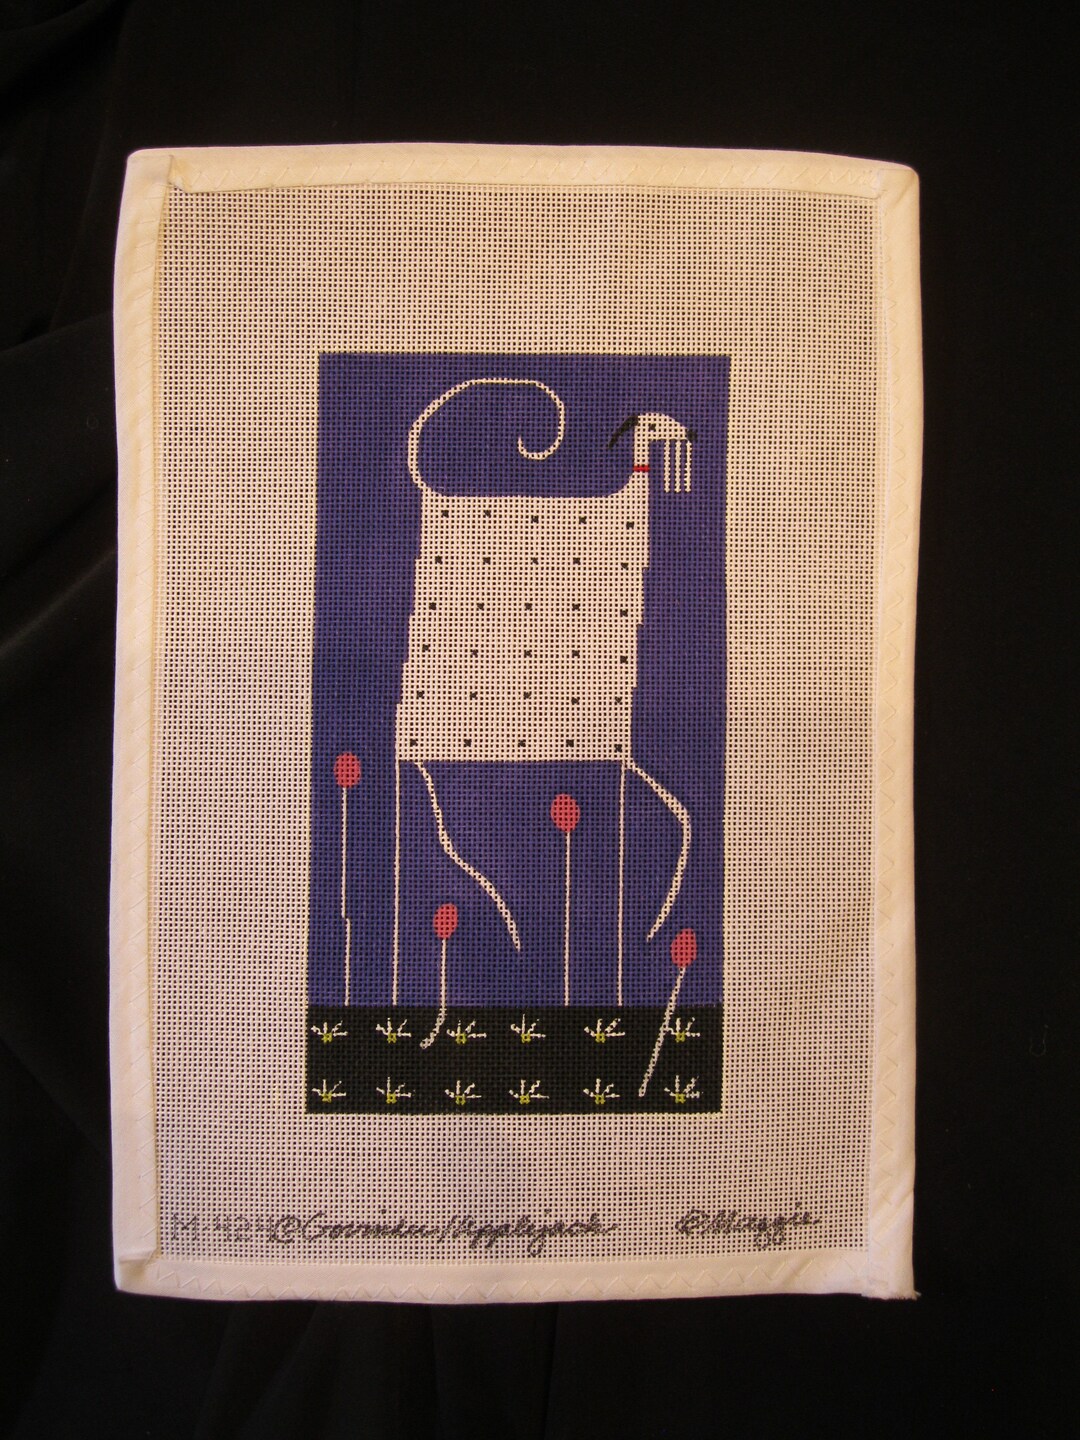 Maggie Needlepoint canvas sold with or without threads and